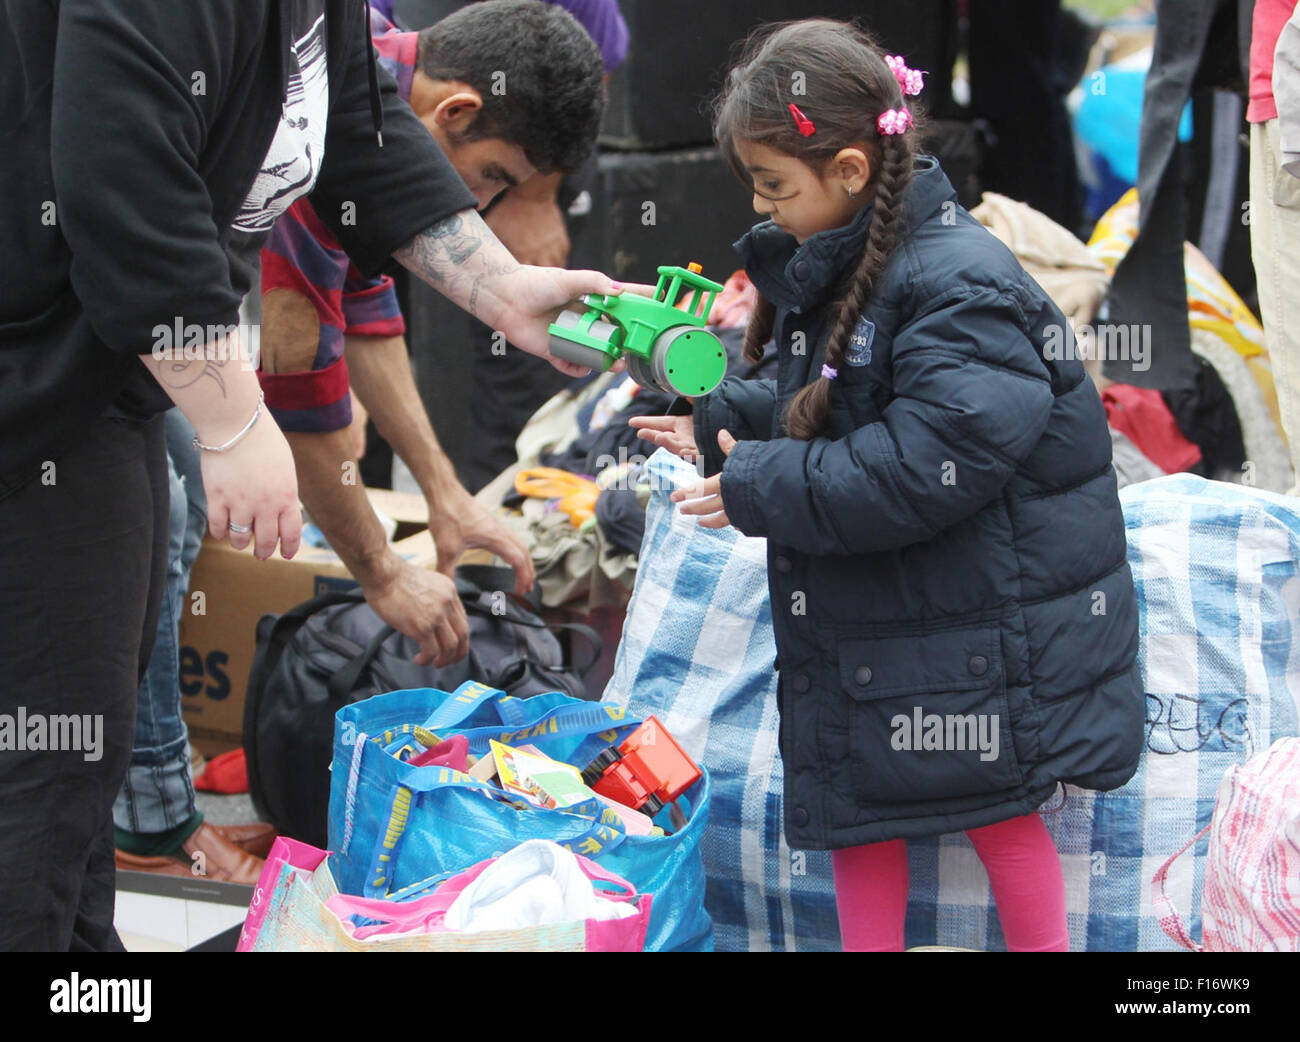 Heideau, Germany. 28th Aug, 2015. A refugee child gets a toy at a welcome party for refugees in Heideau, Germany, 28 August 2015. The welcome party was organised by Buendnis Dresden Nazifrei (lit. Dresden anti-Nazi league). PHOTO: SEBASTIAN WILLNOW/DPA/Alamy Live News Stock Photo